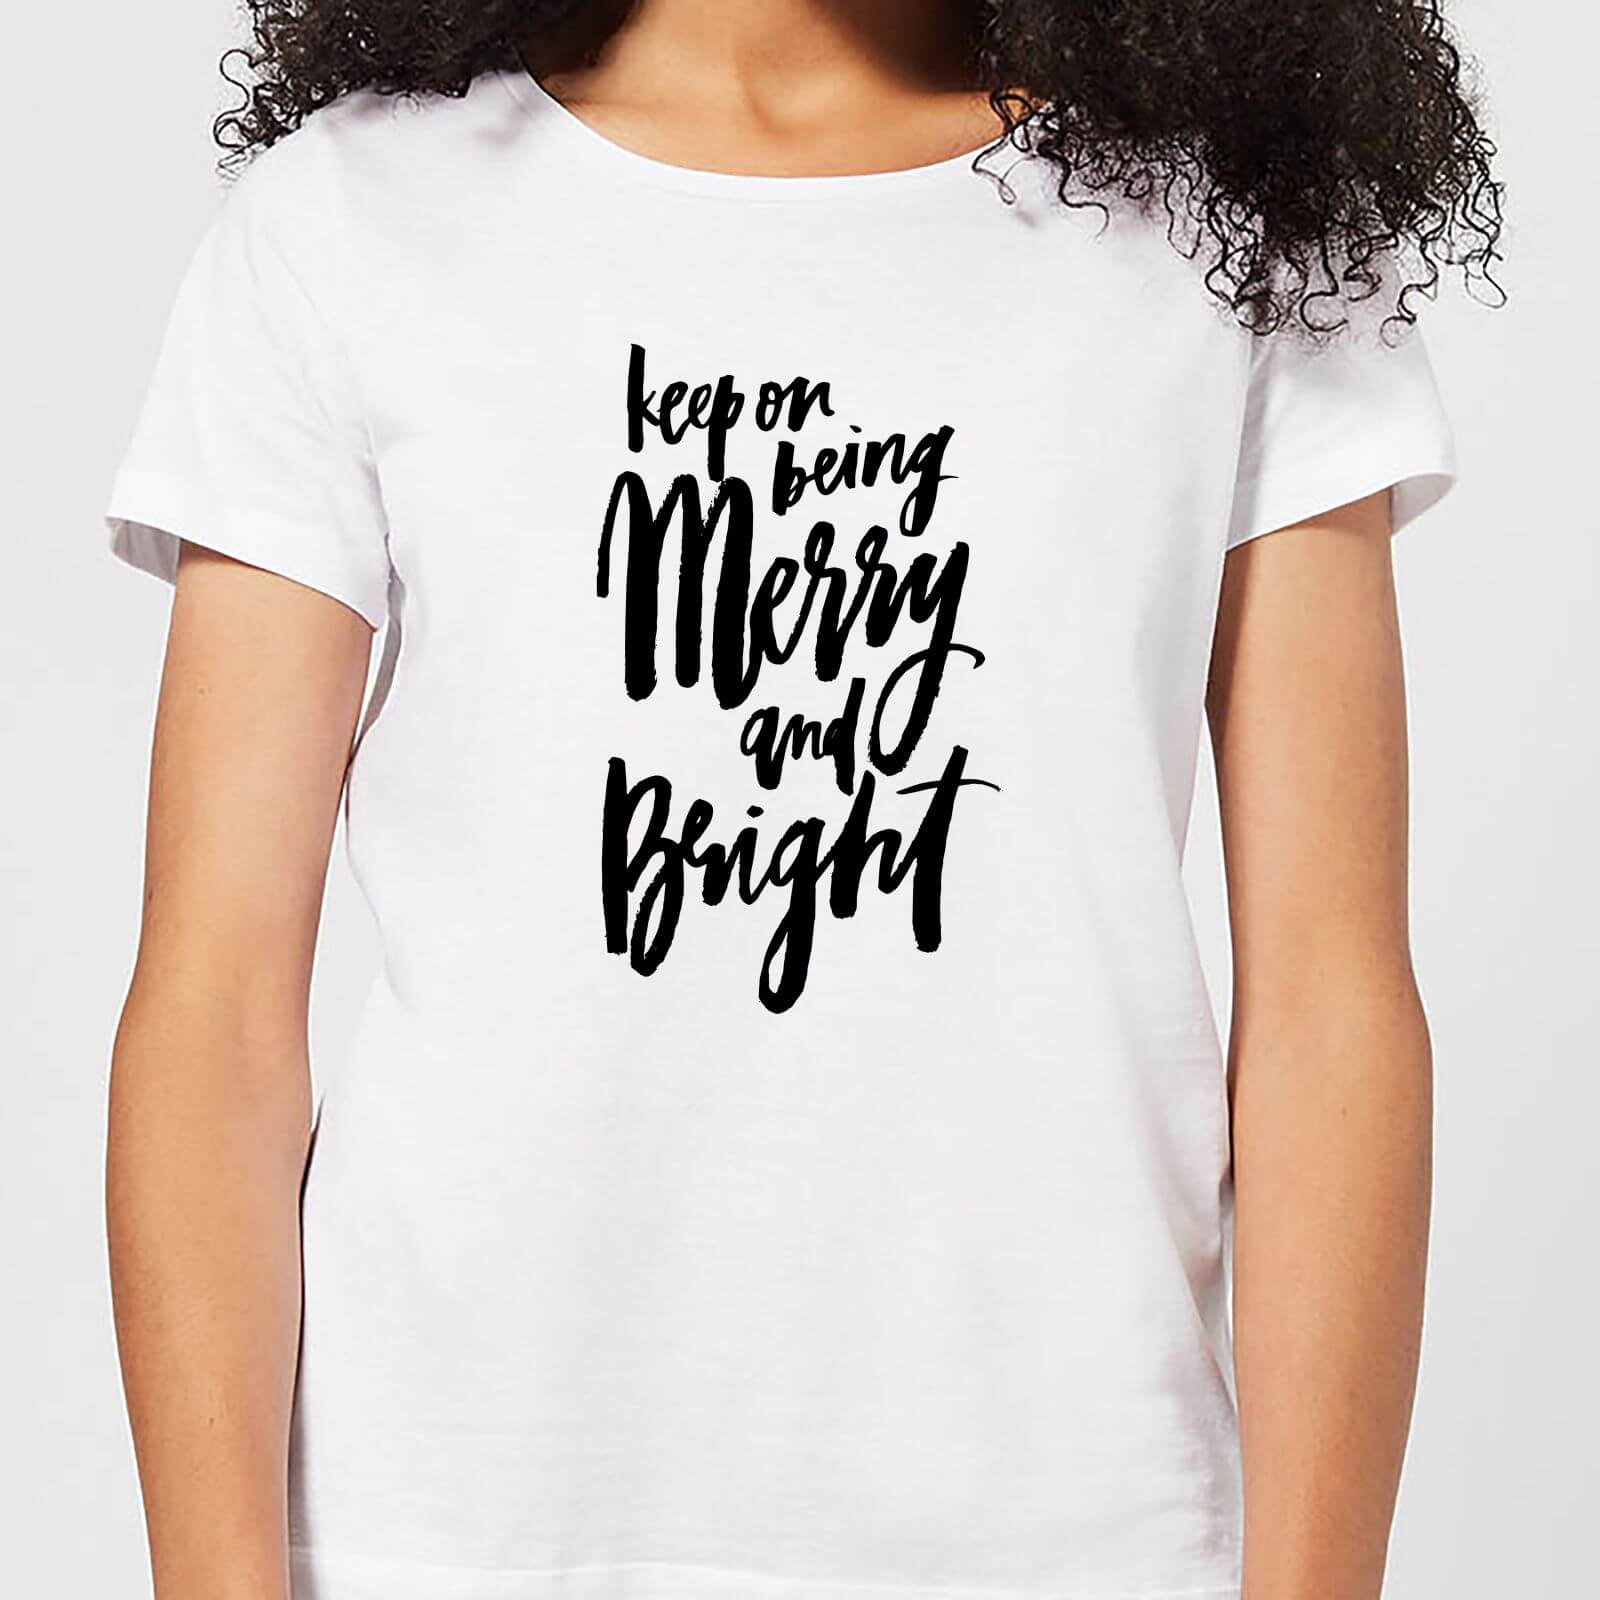 Keep On Being Merry and Bright Women's T-Shirt - White - S - White